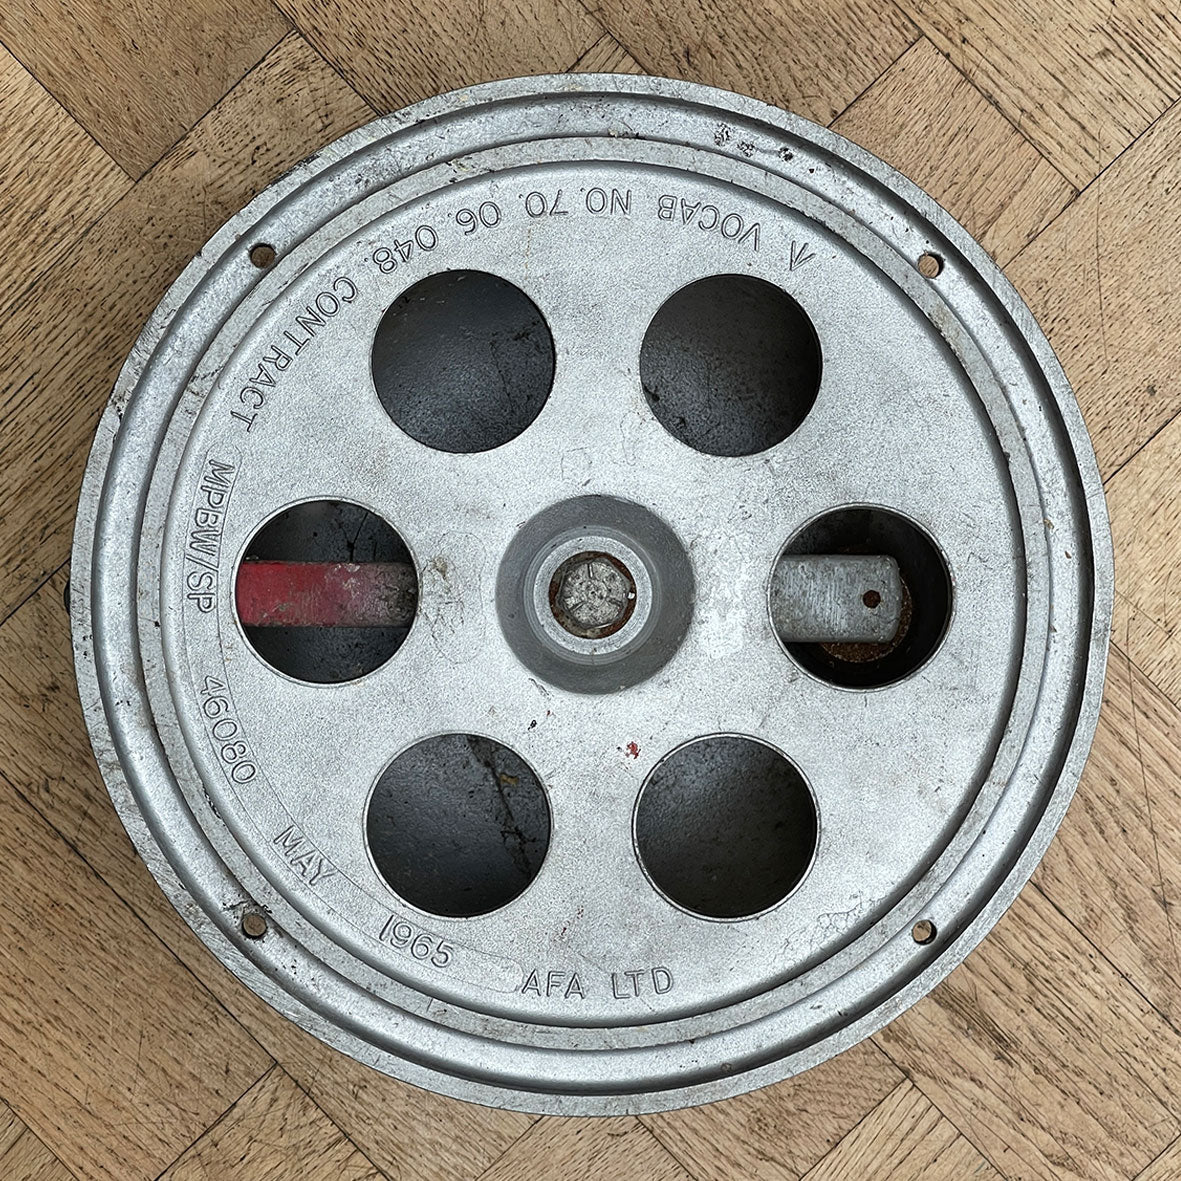 Vintage Hand-Cranked Fire Alarm. Makes a HUGE sound and looks good on the wall too! Great for waking up teenagers or gathering the family for dinner! SHOP NOW - www.intovintage.co.uk